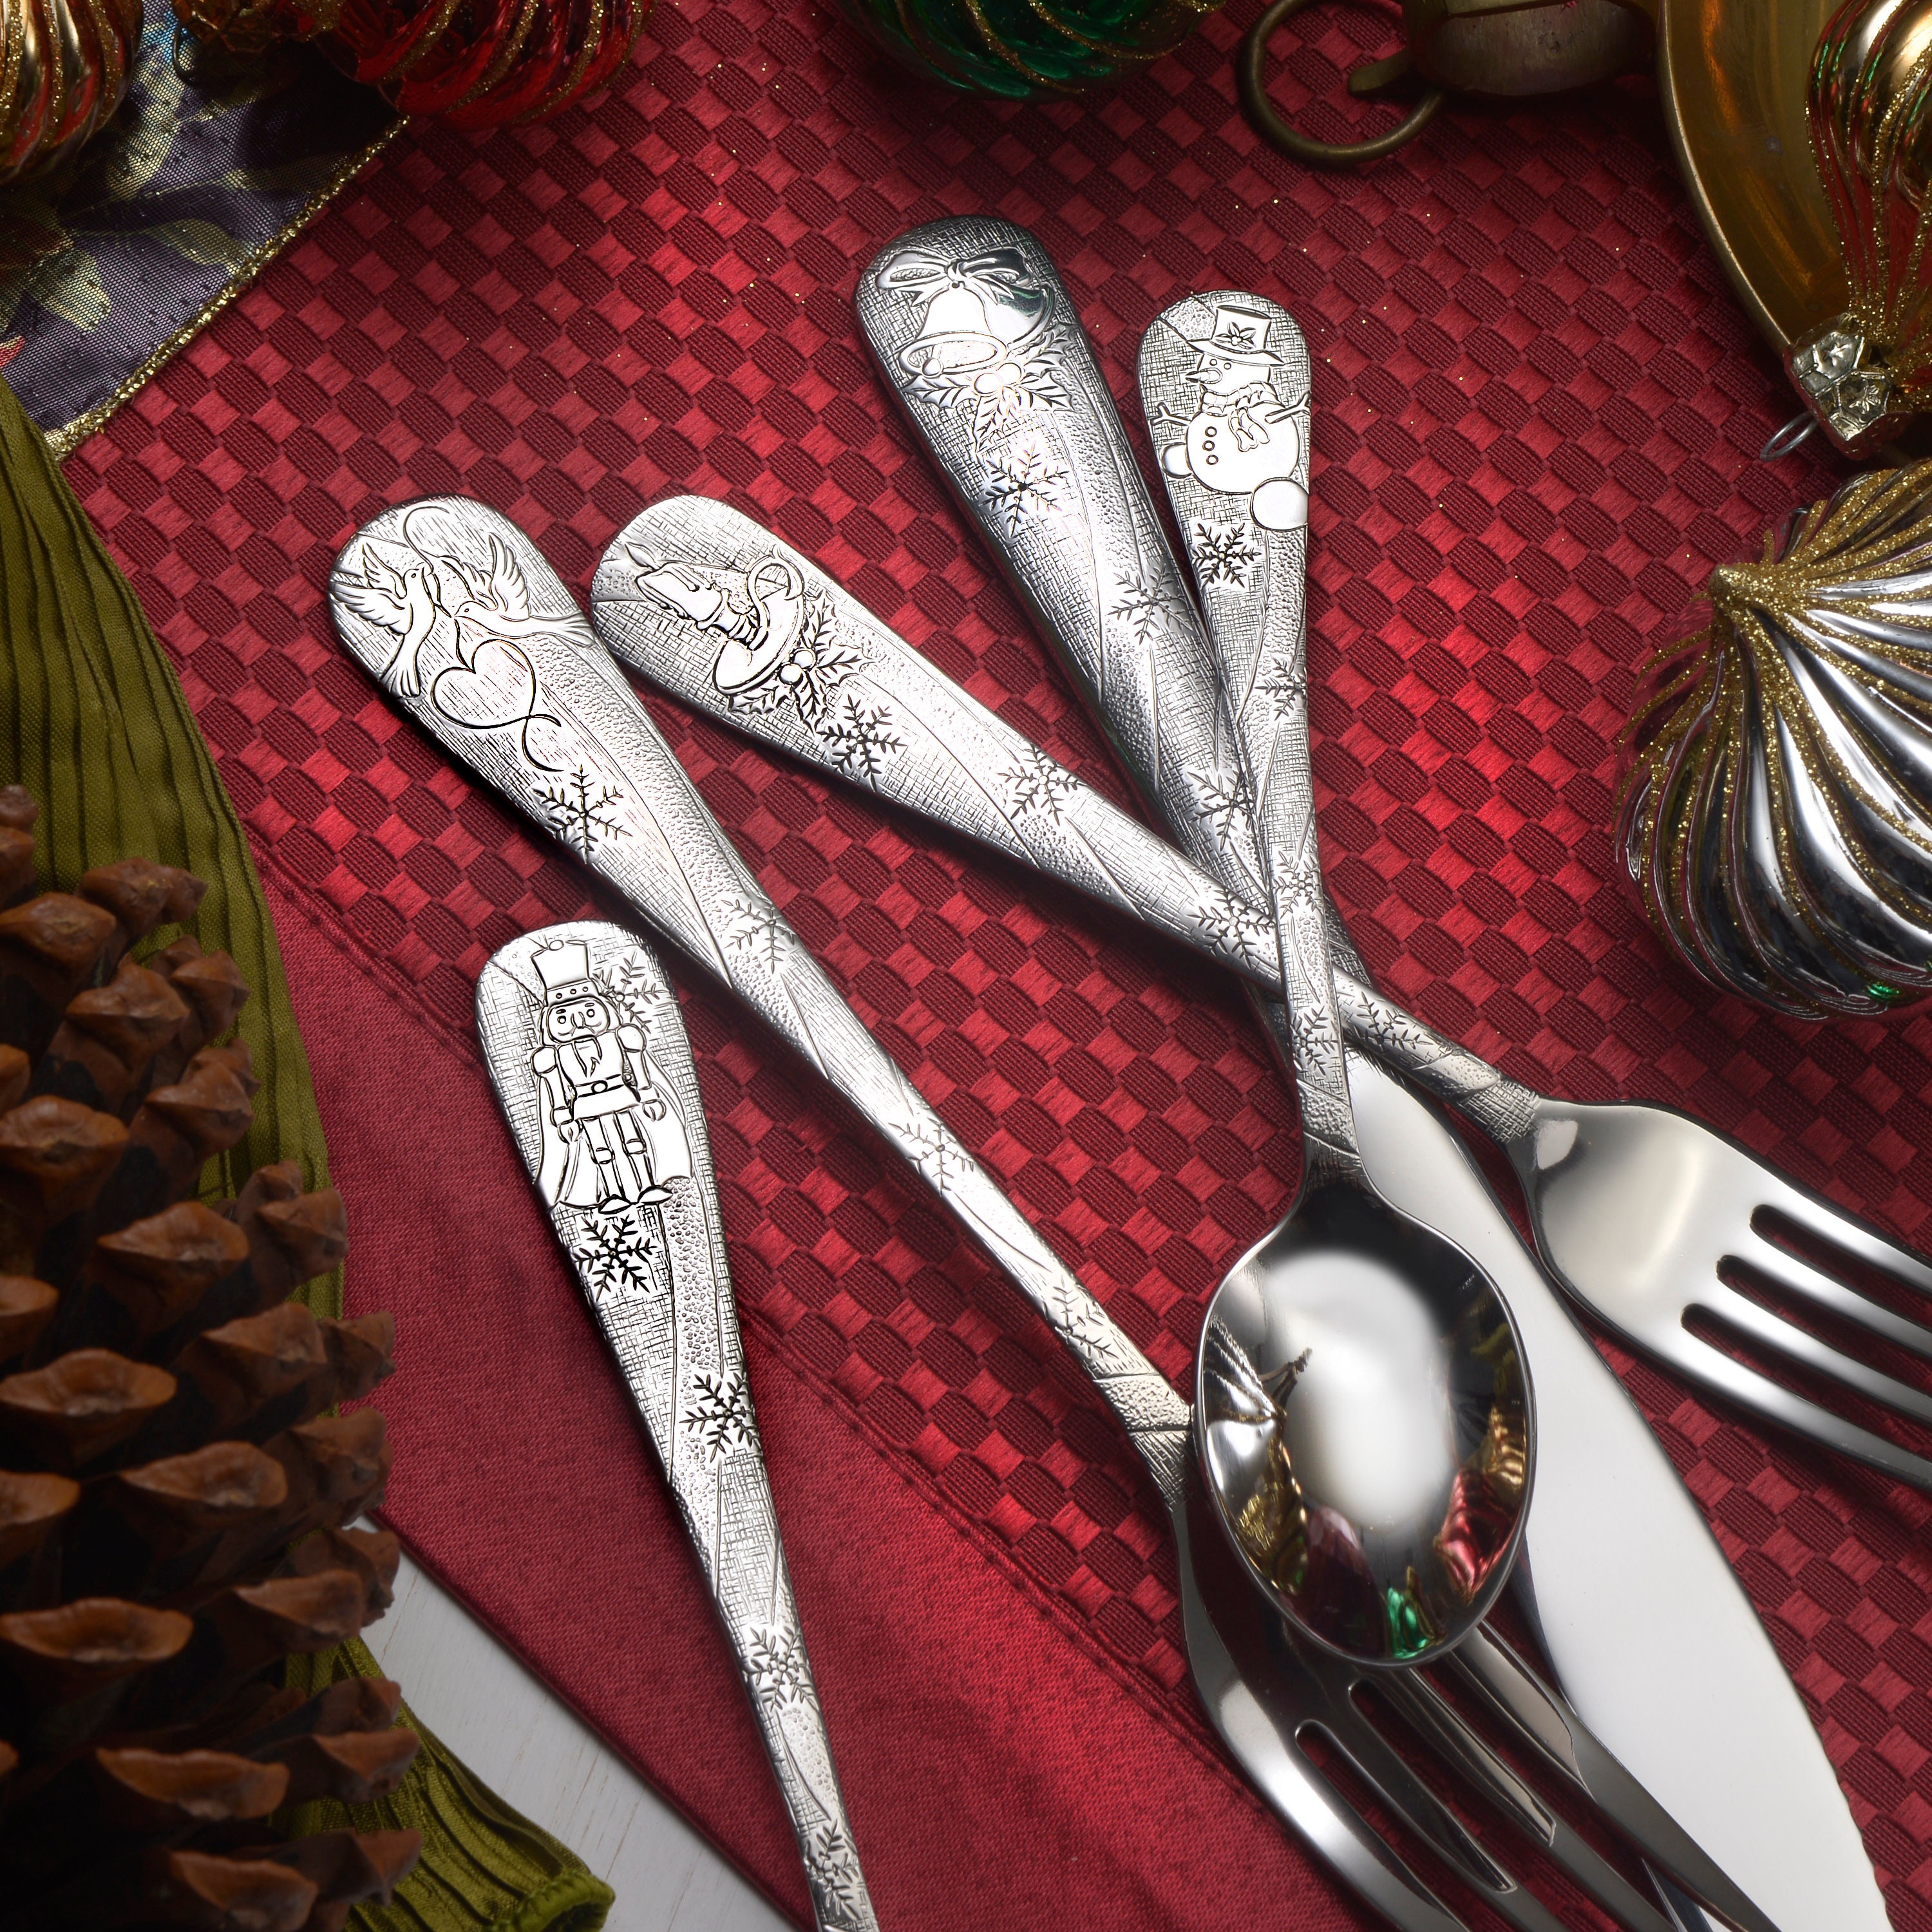 Lexington - Liberty Tabletop - The Only Flatware Made in the USA